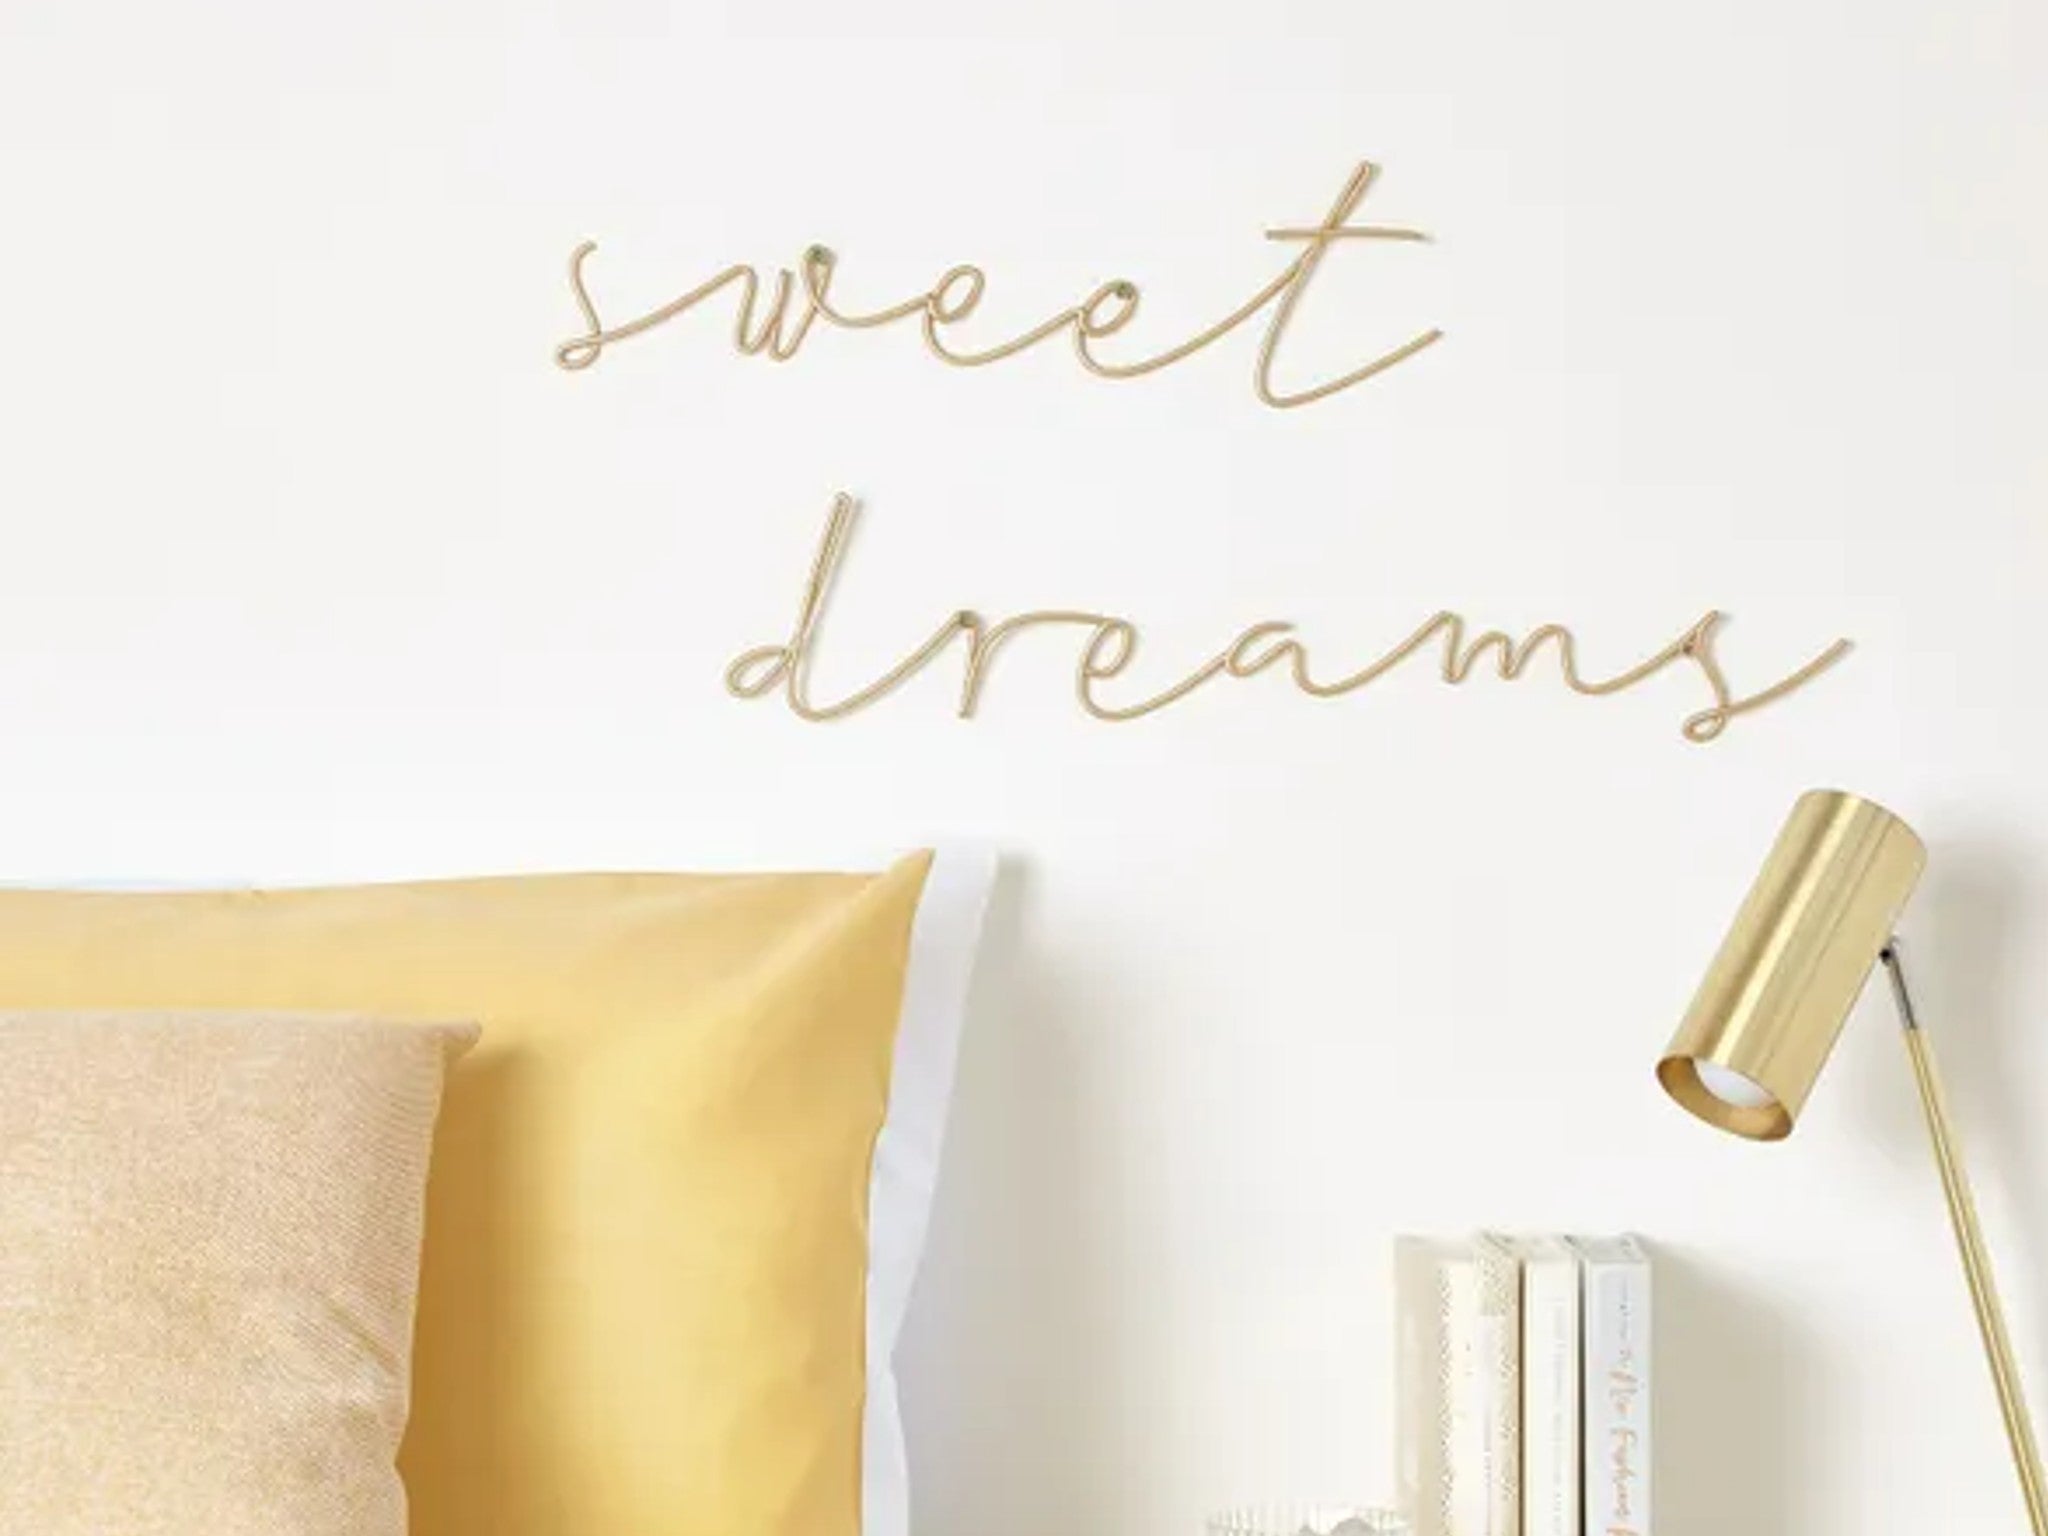 https://static.independent.co.uk/2023/05/19/17/sweet%20dreams%20sign.jpg